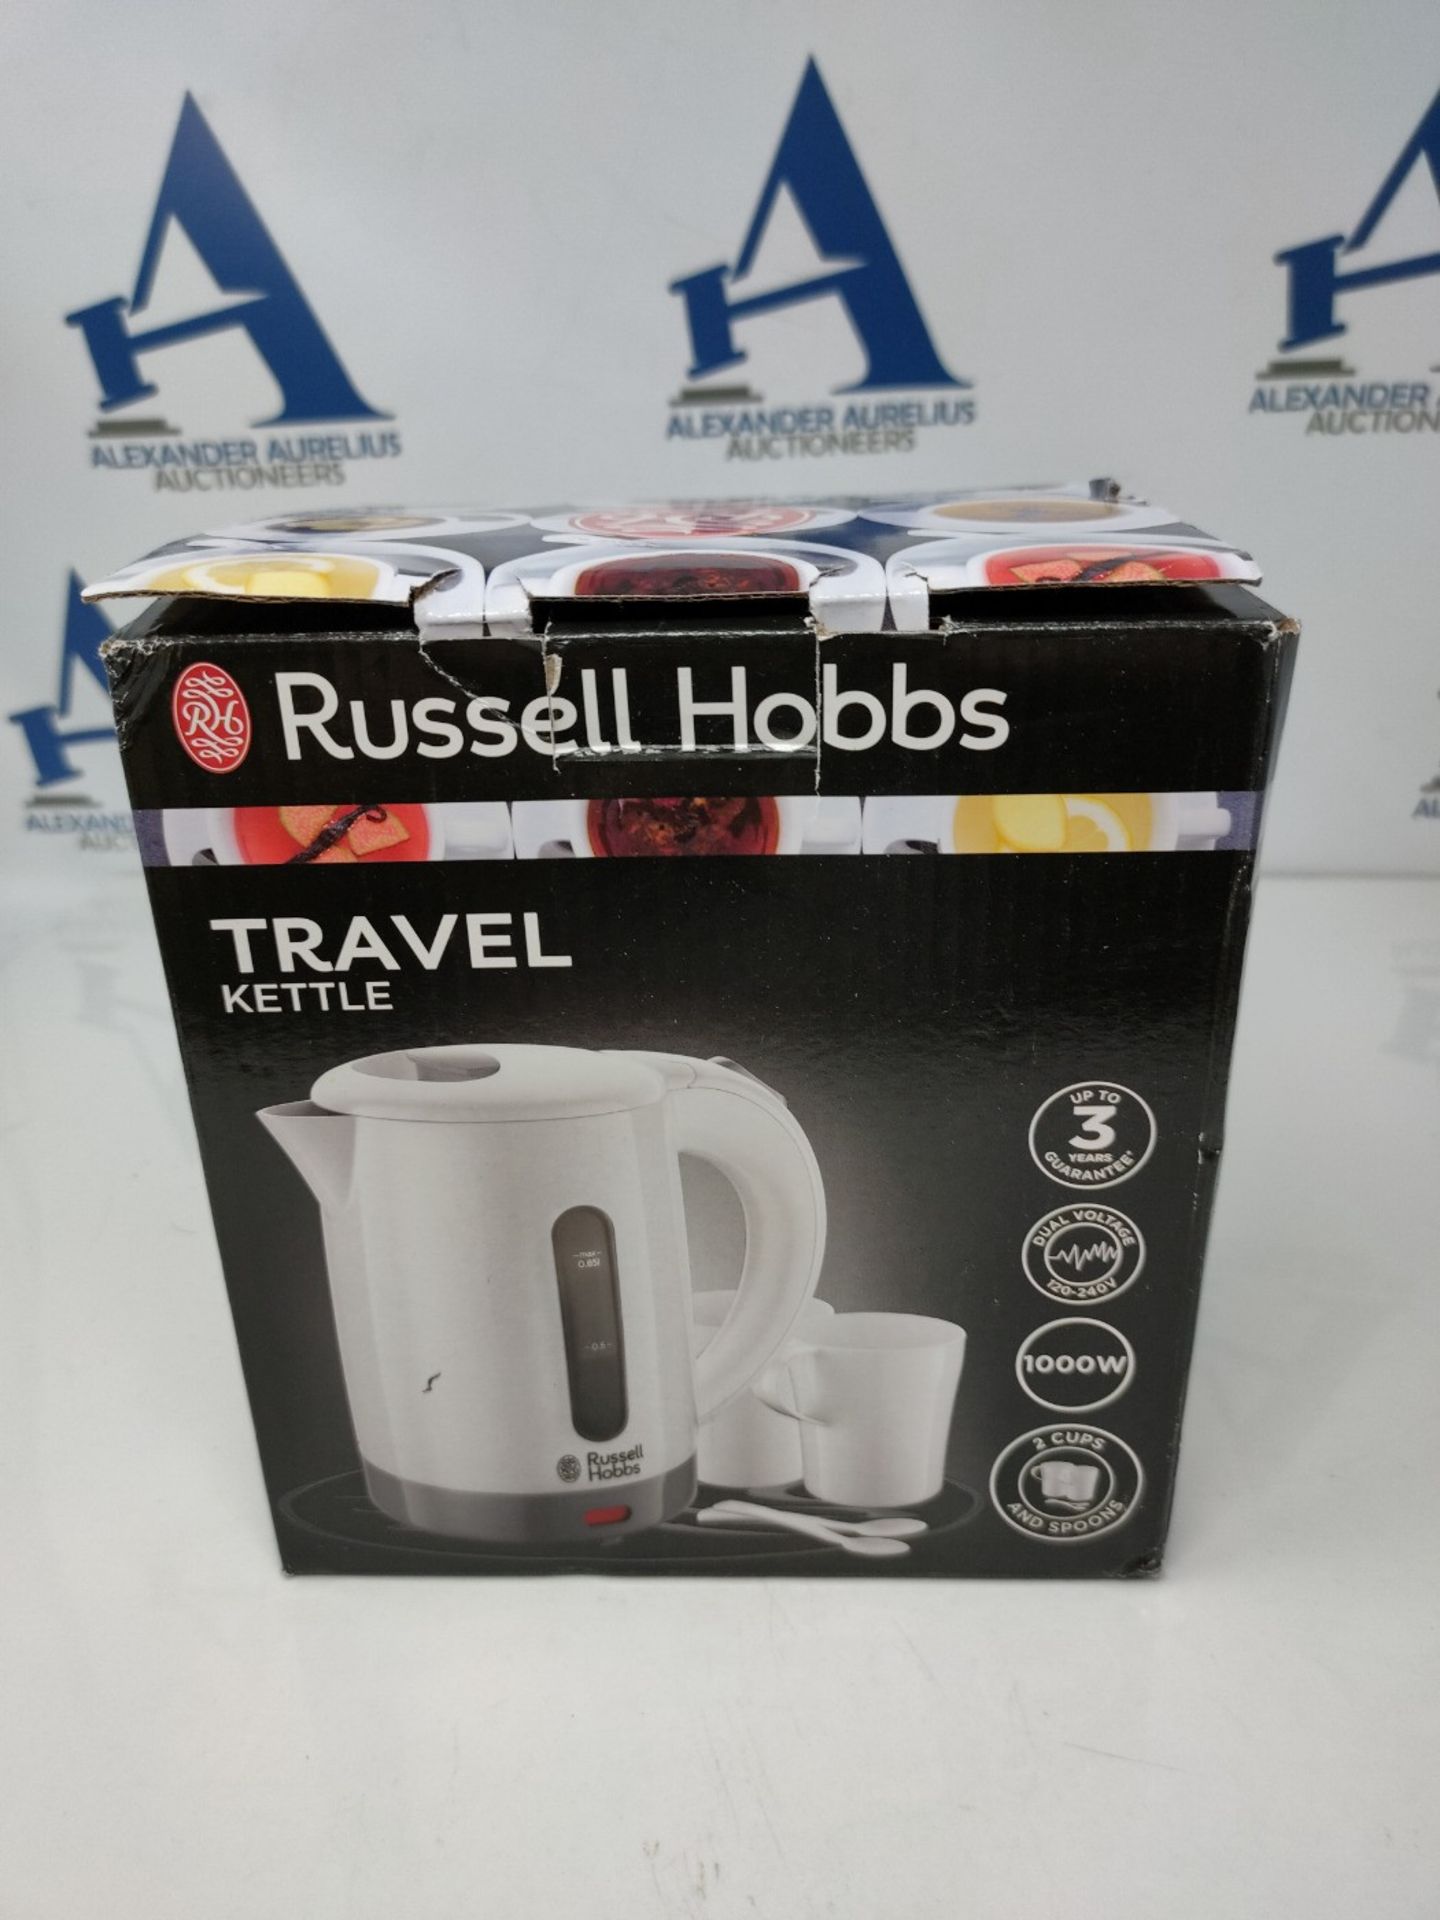 Russell Hobbs 23840 Compact Travel Electric Kettle, Plastic, 1000 W, White - Bild 2 aus 3